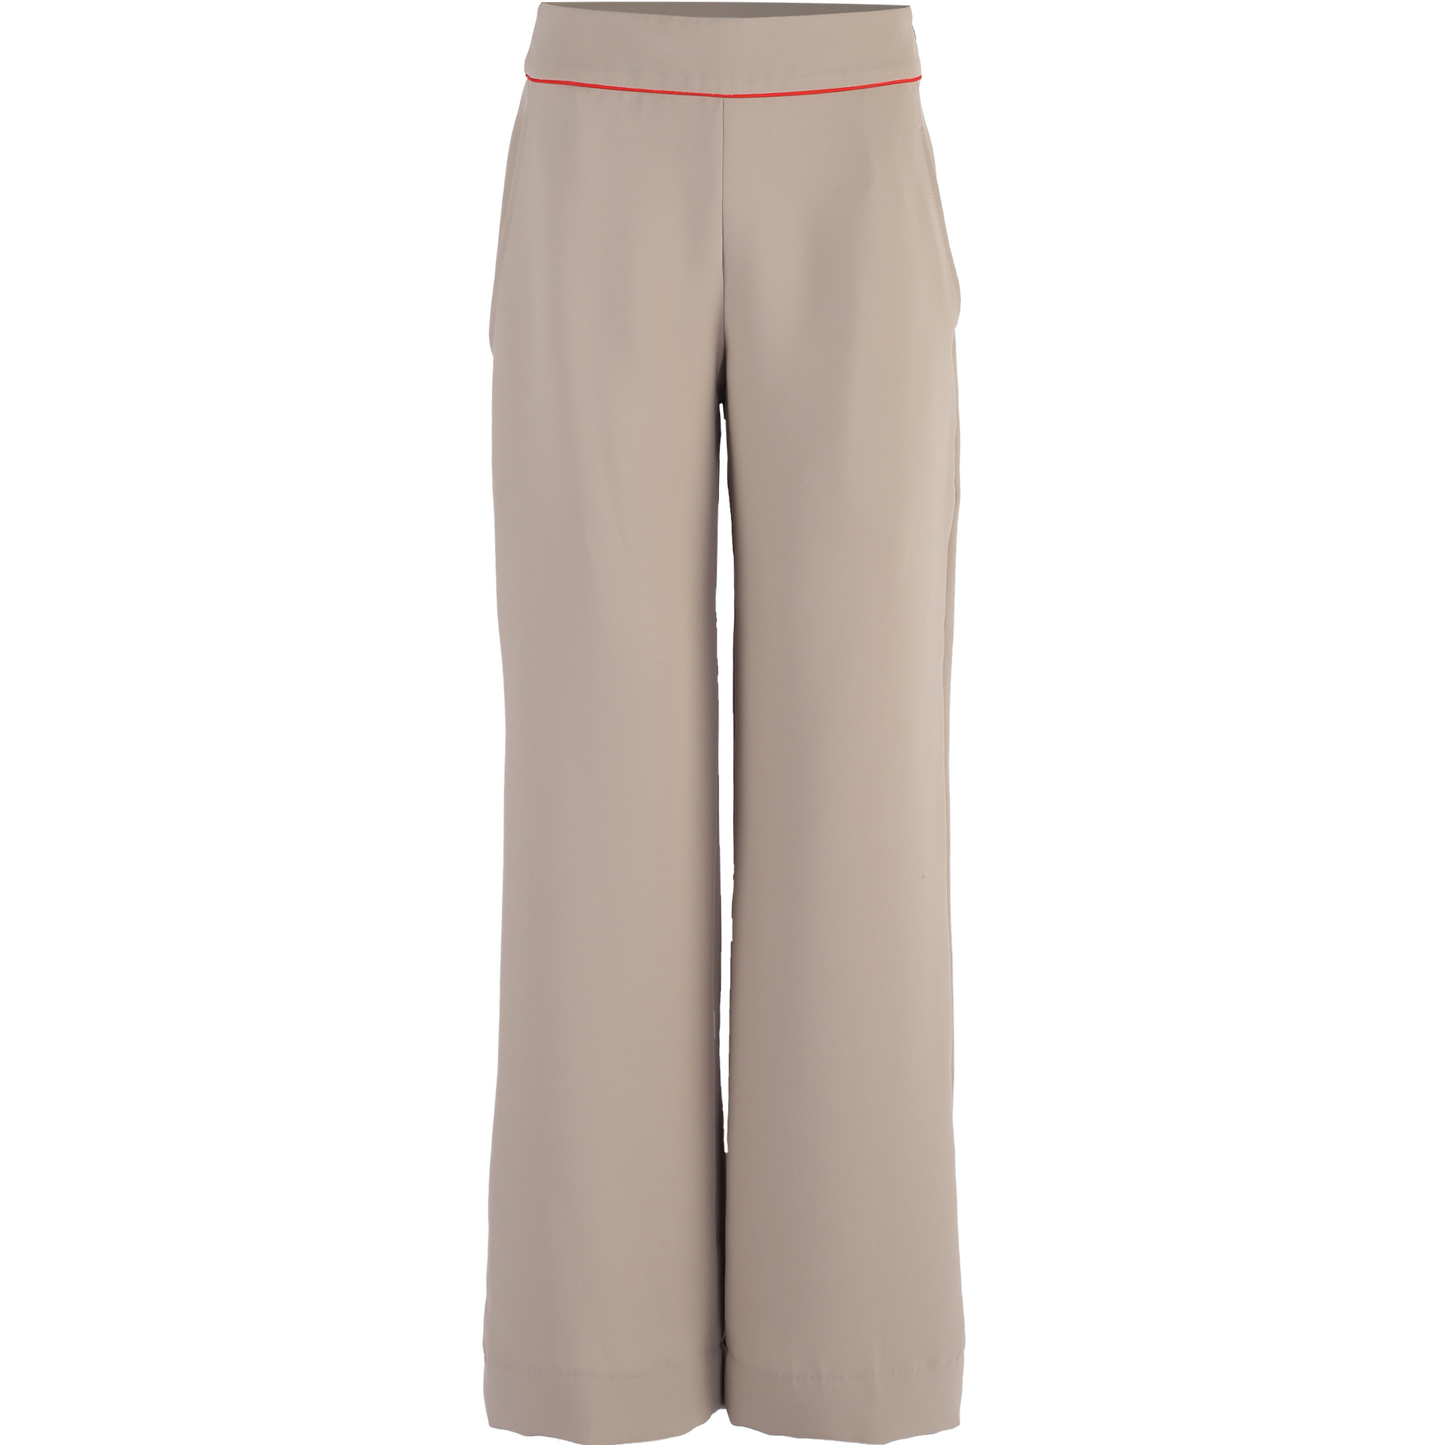 Beige Palazzo Pants for Female Frontline Associate — Uniforms by CYC Corporate Label